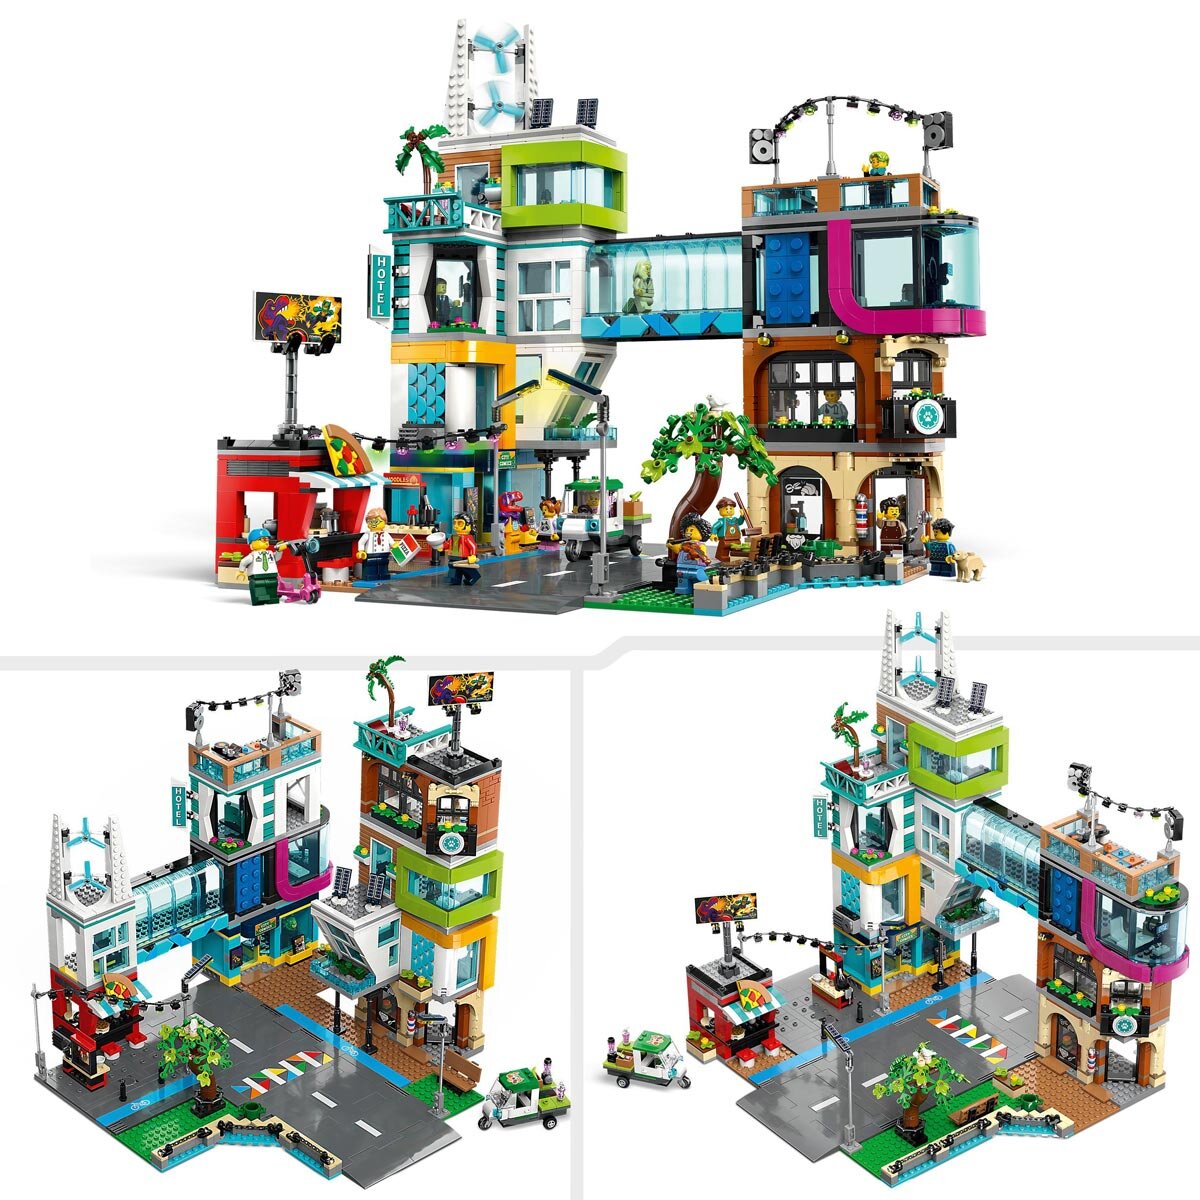 Buy LEGO CIty Centre Overview2 Image at Costco.co.uk